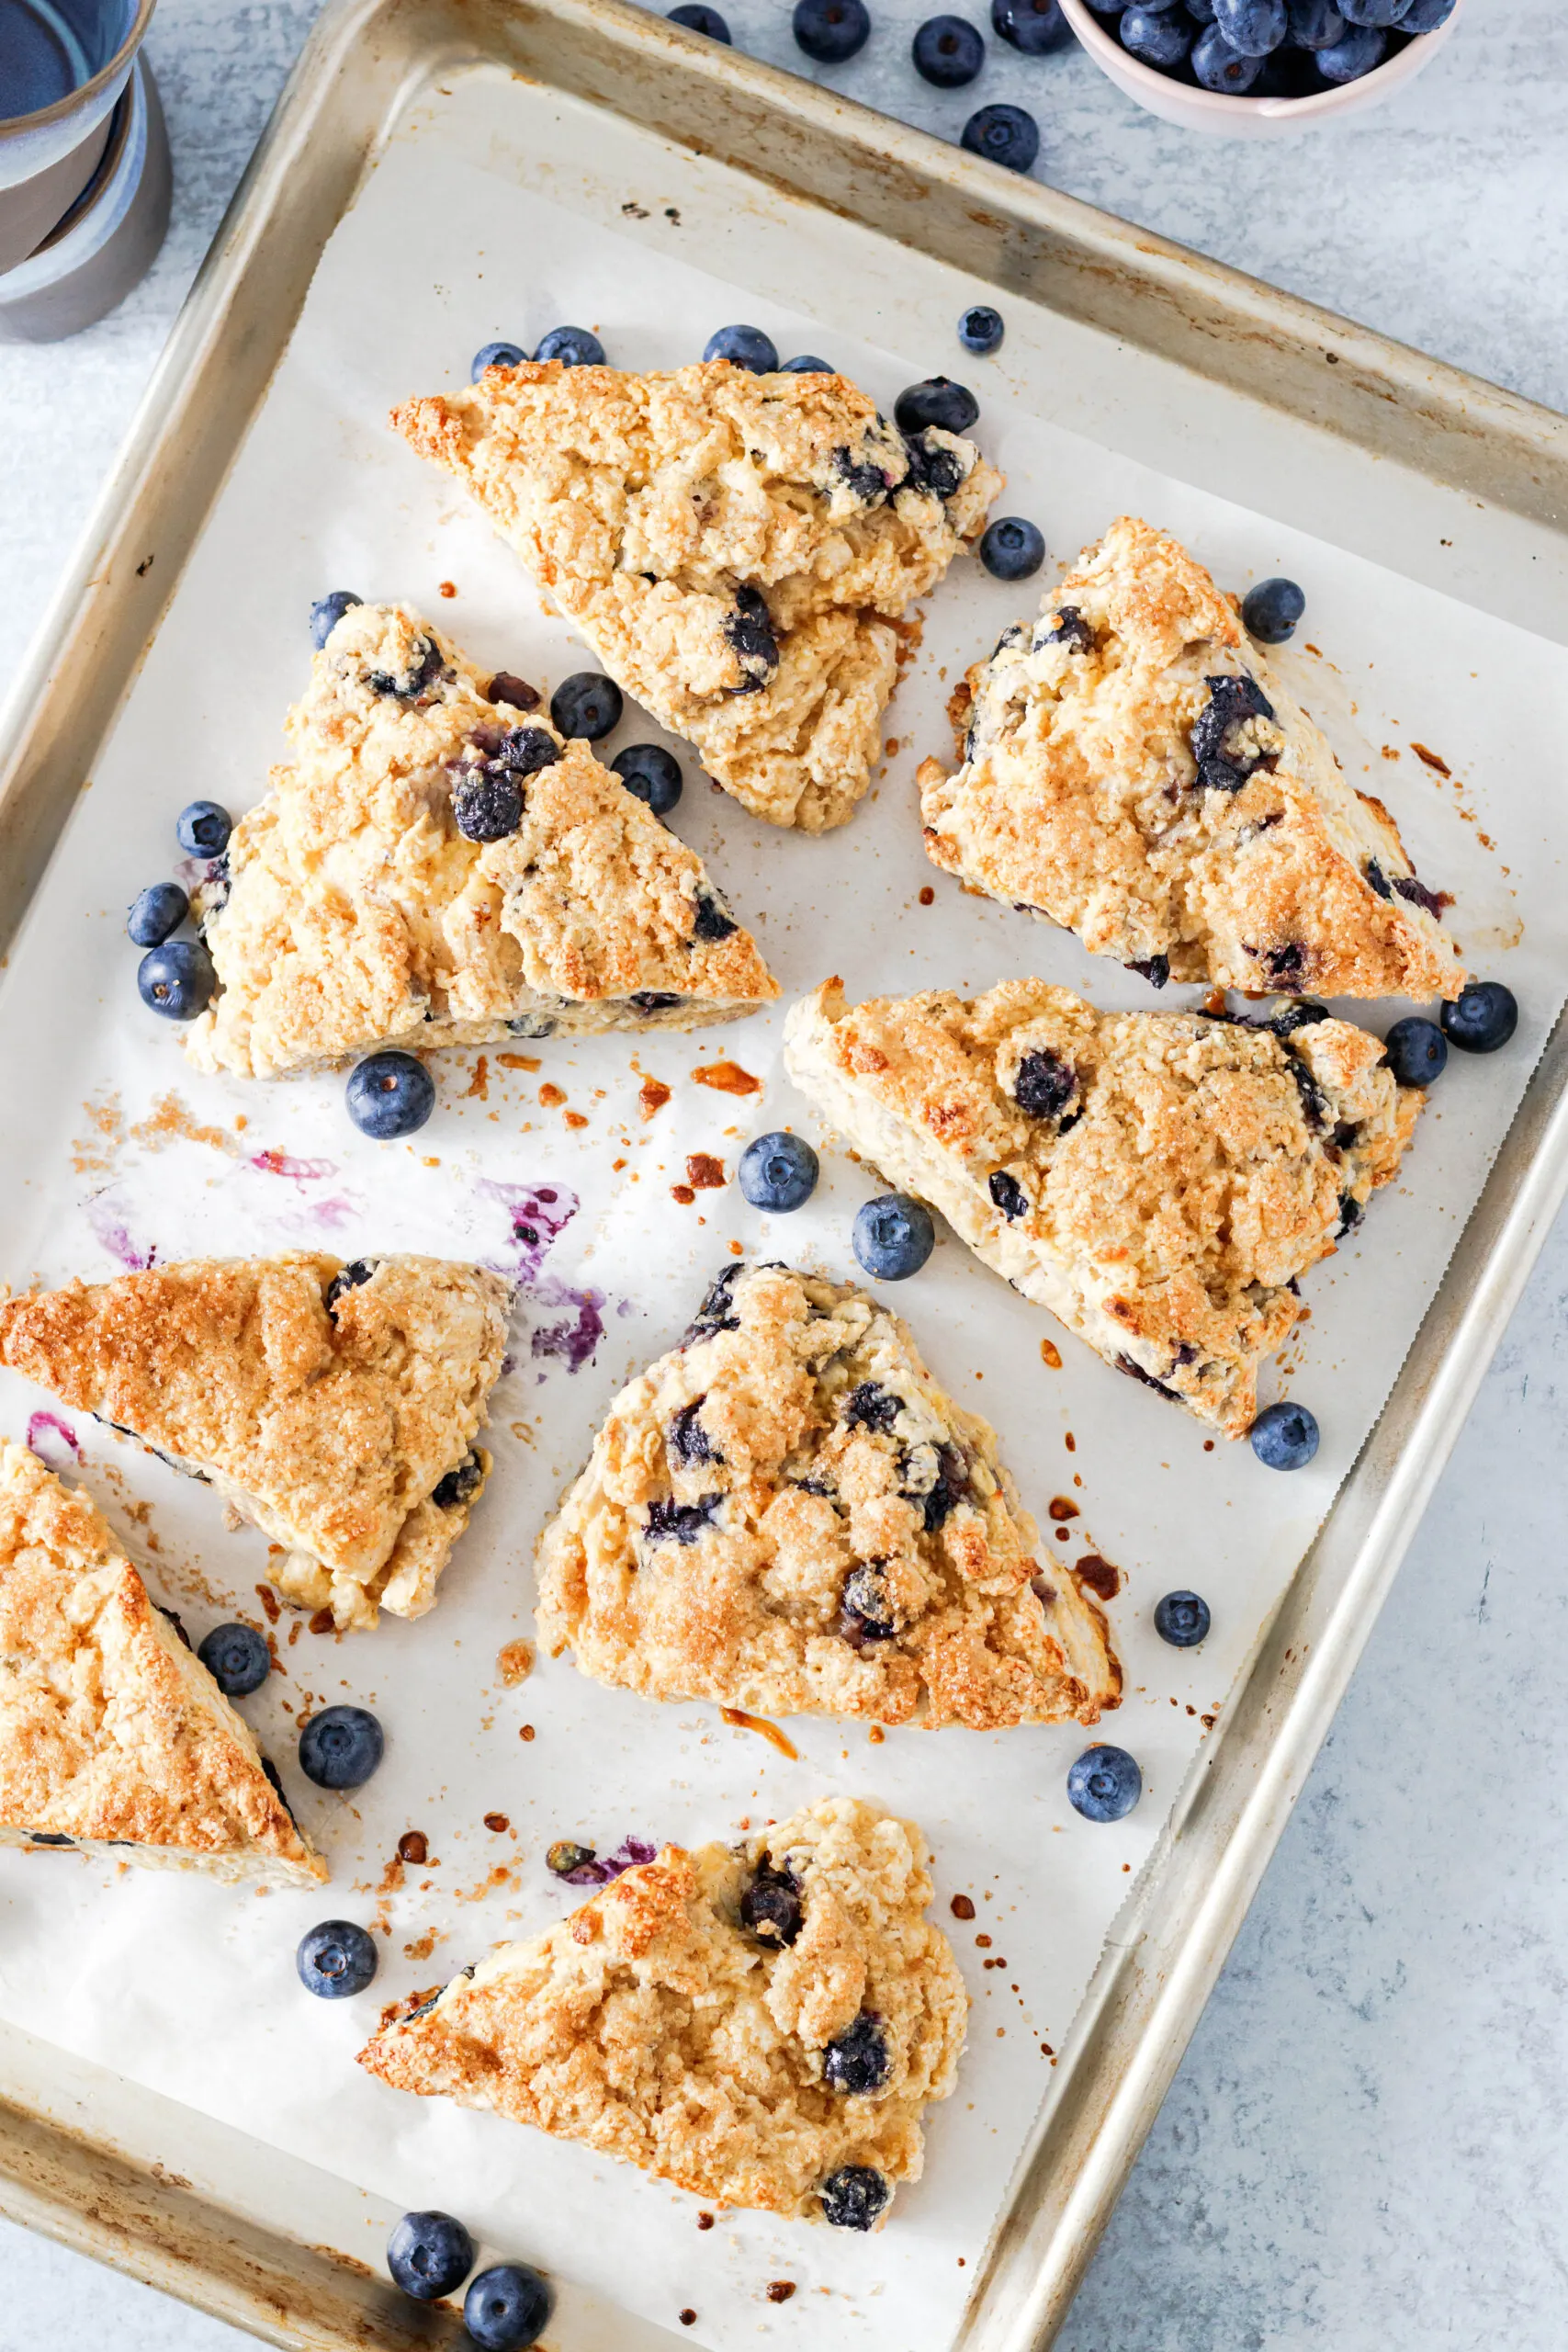 Top view of the baked scones on a light aluminum rimmed baking sheet with scattered blueberries